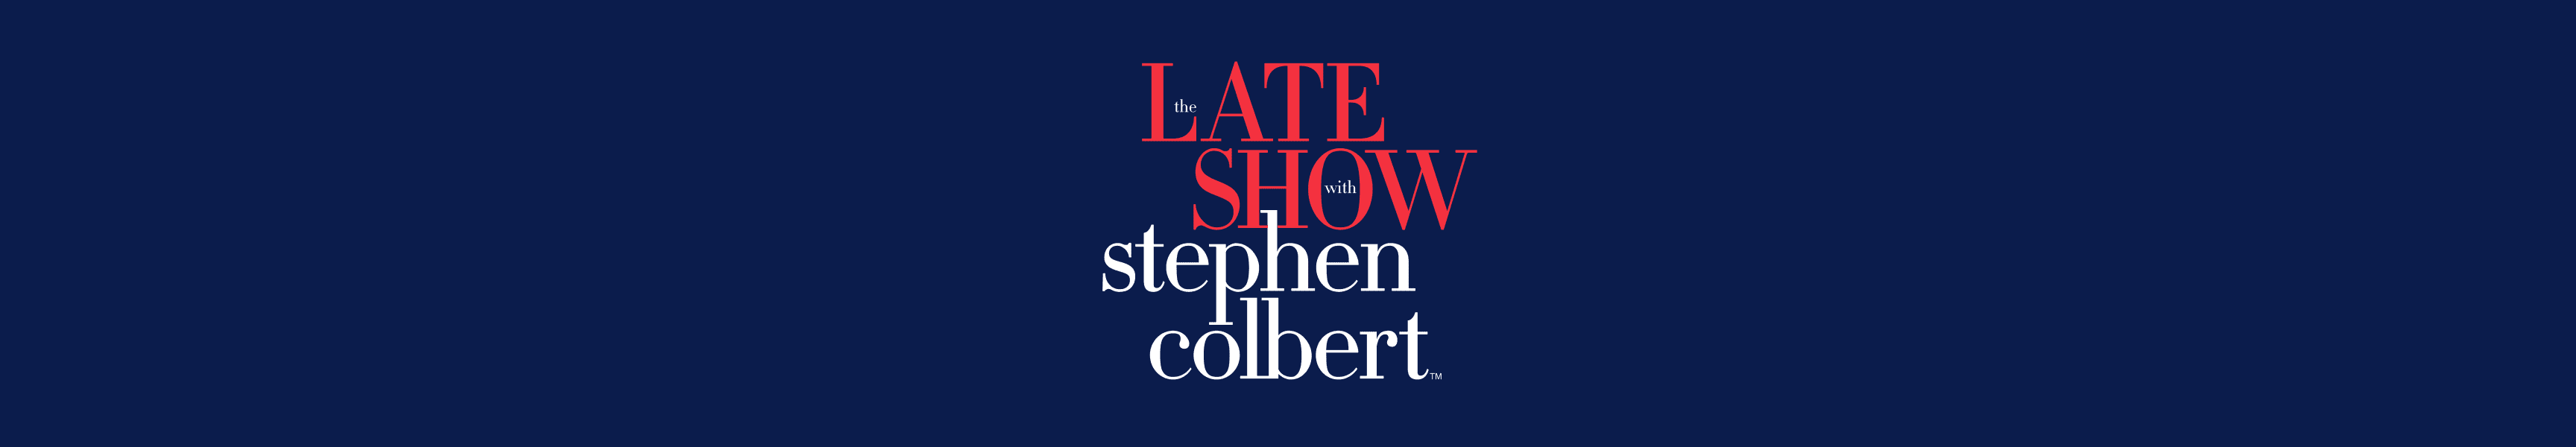 The Late Show with Stephen Colbert Es Patata